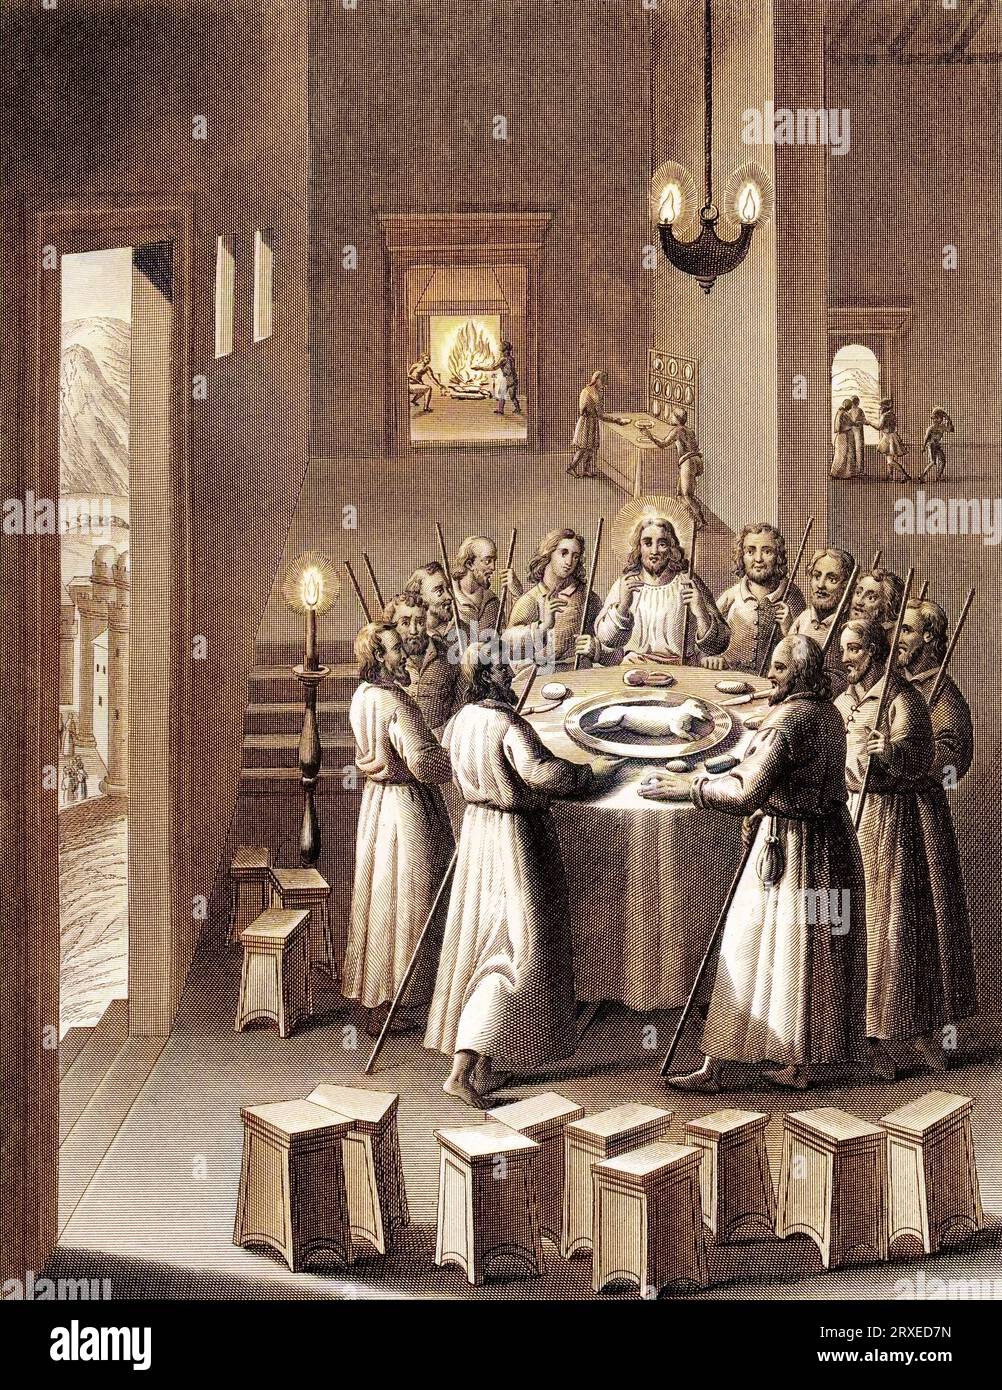 Jesus eating the Passover lamb with his disciples. Colored Illustration for The life of Our Lord Jesus Christ written by the four evangelists, 1853 Stock Photo